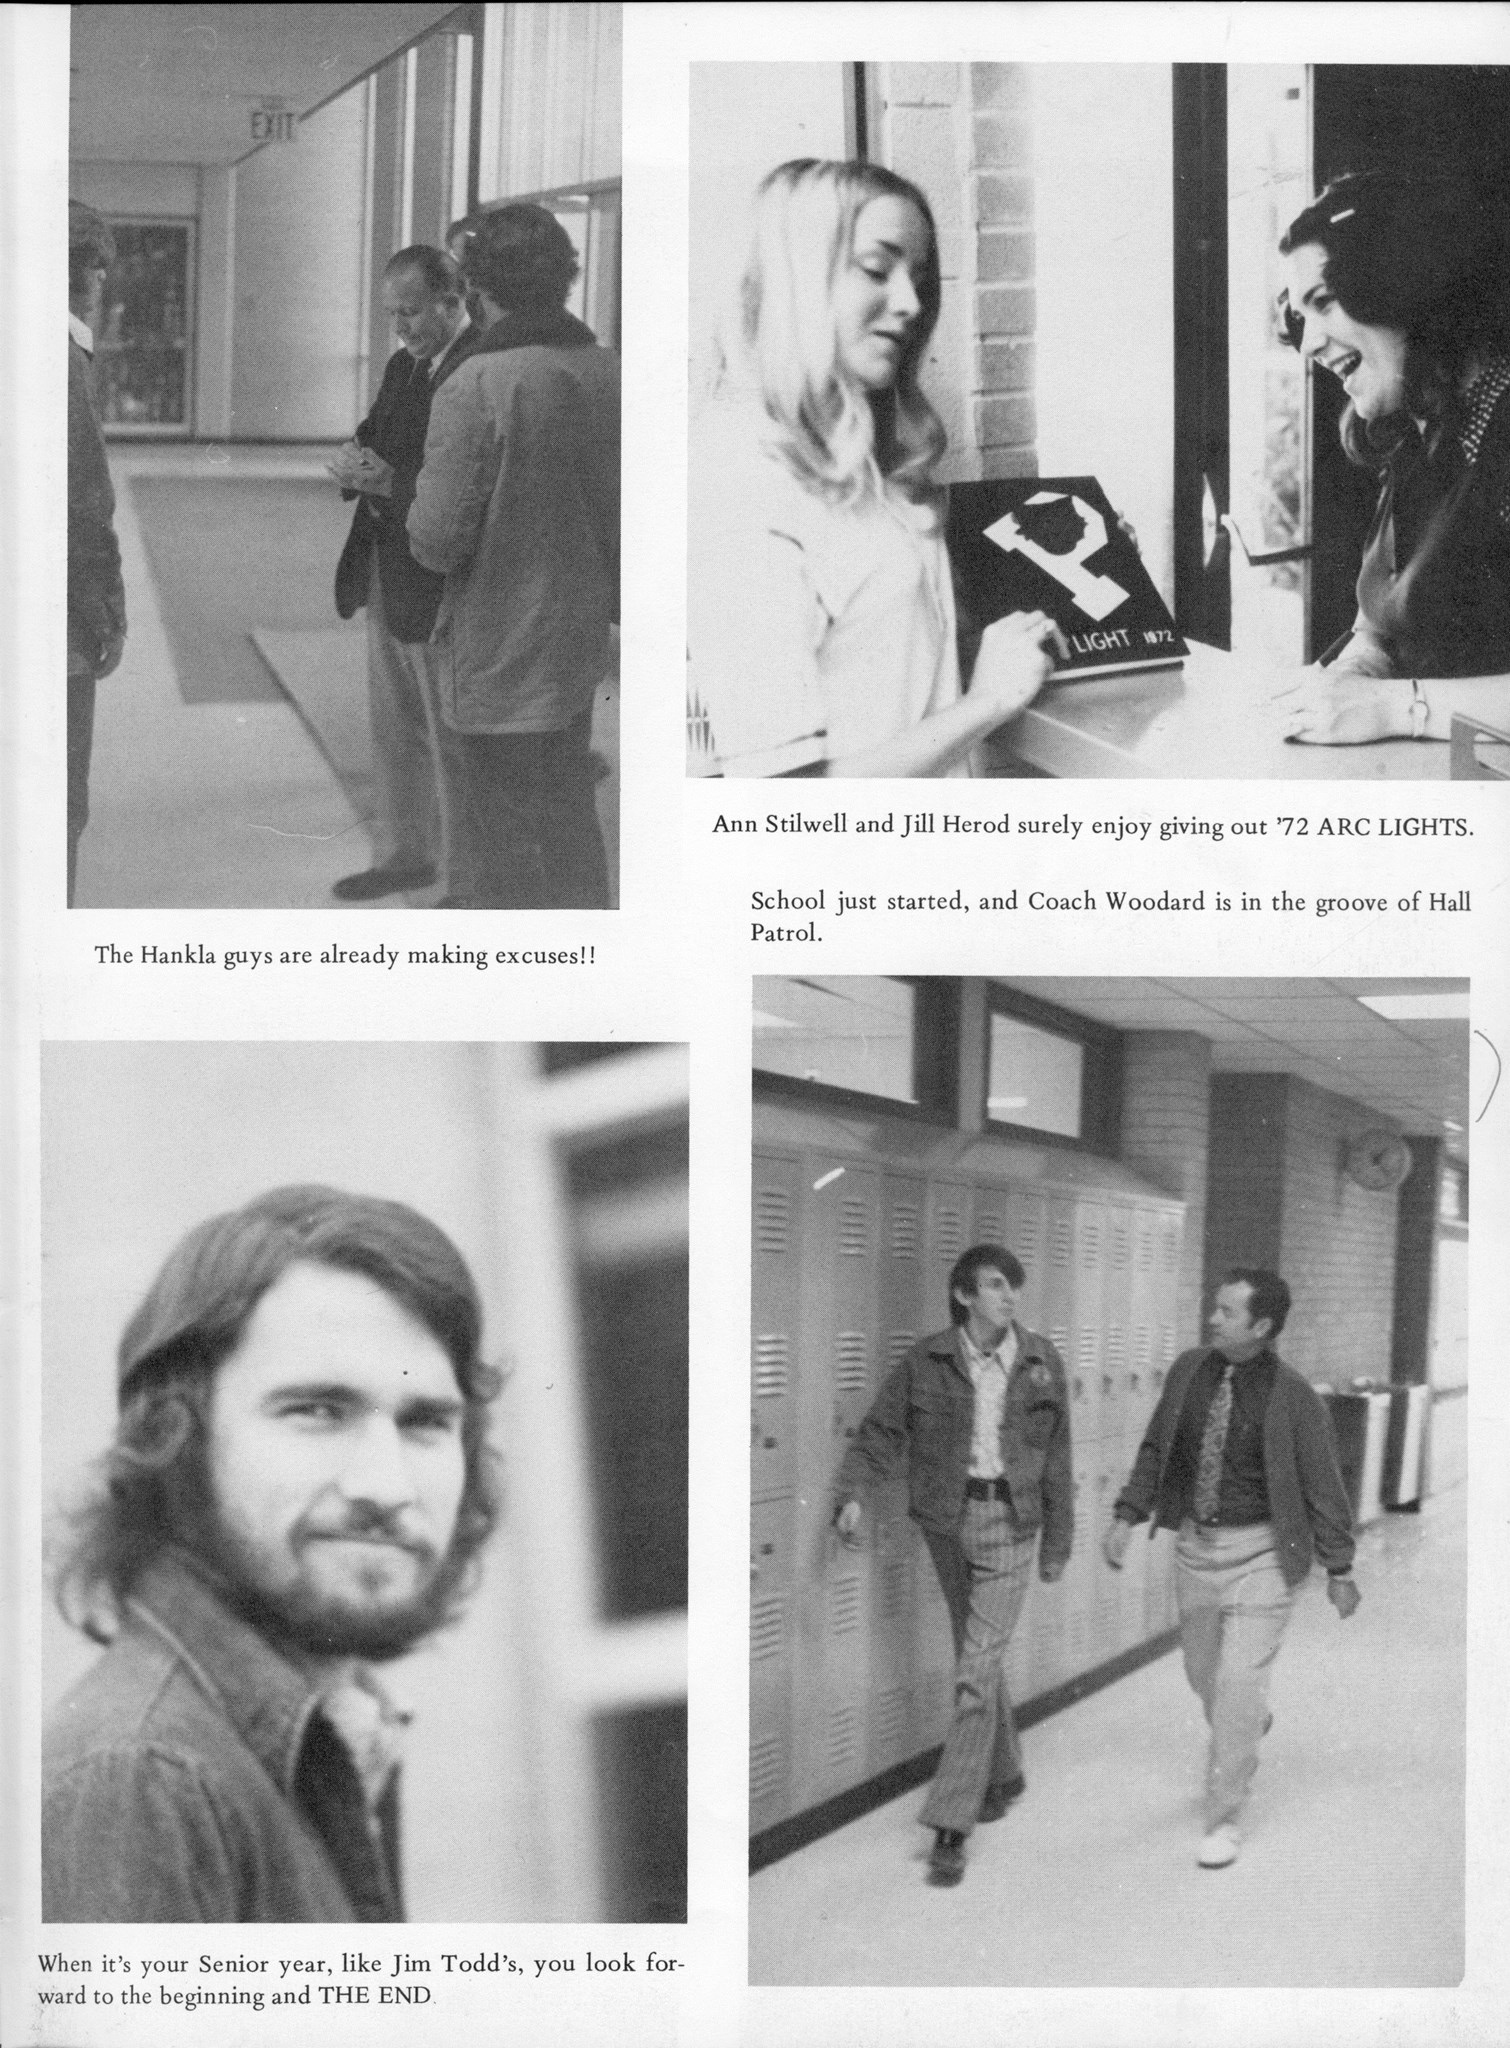 ../../../Images/Large/1973/Arclight-1973-pg0003.jpg